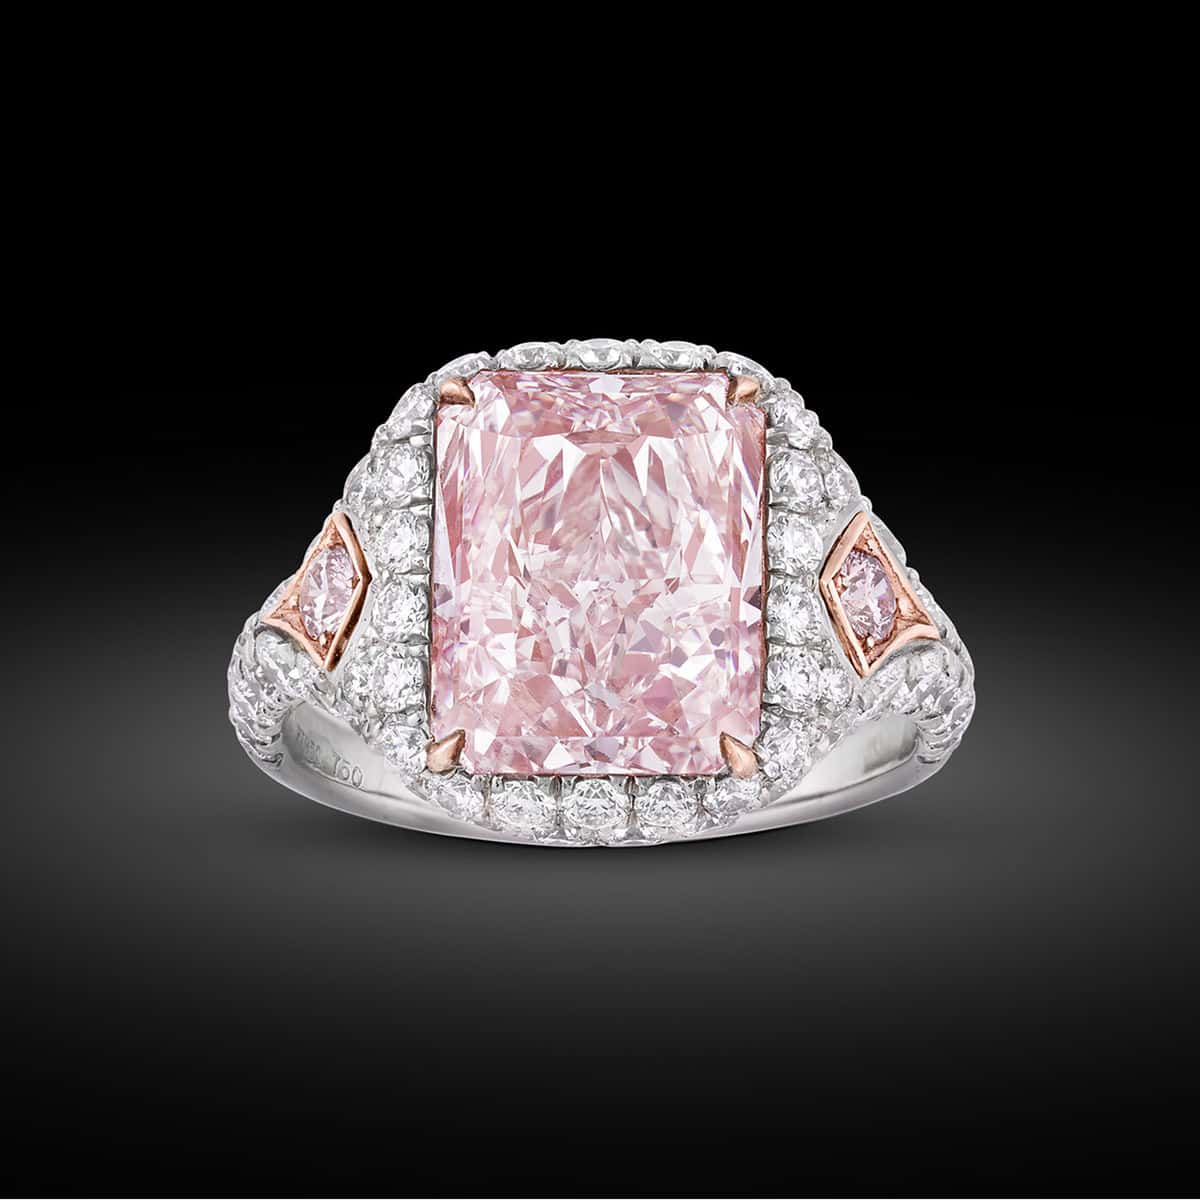 Would You Like a $5 Million Fancy Pink Diamond Ring?